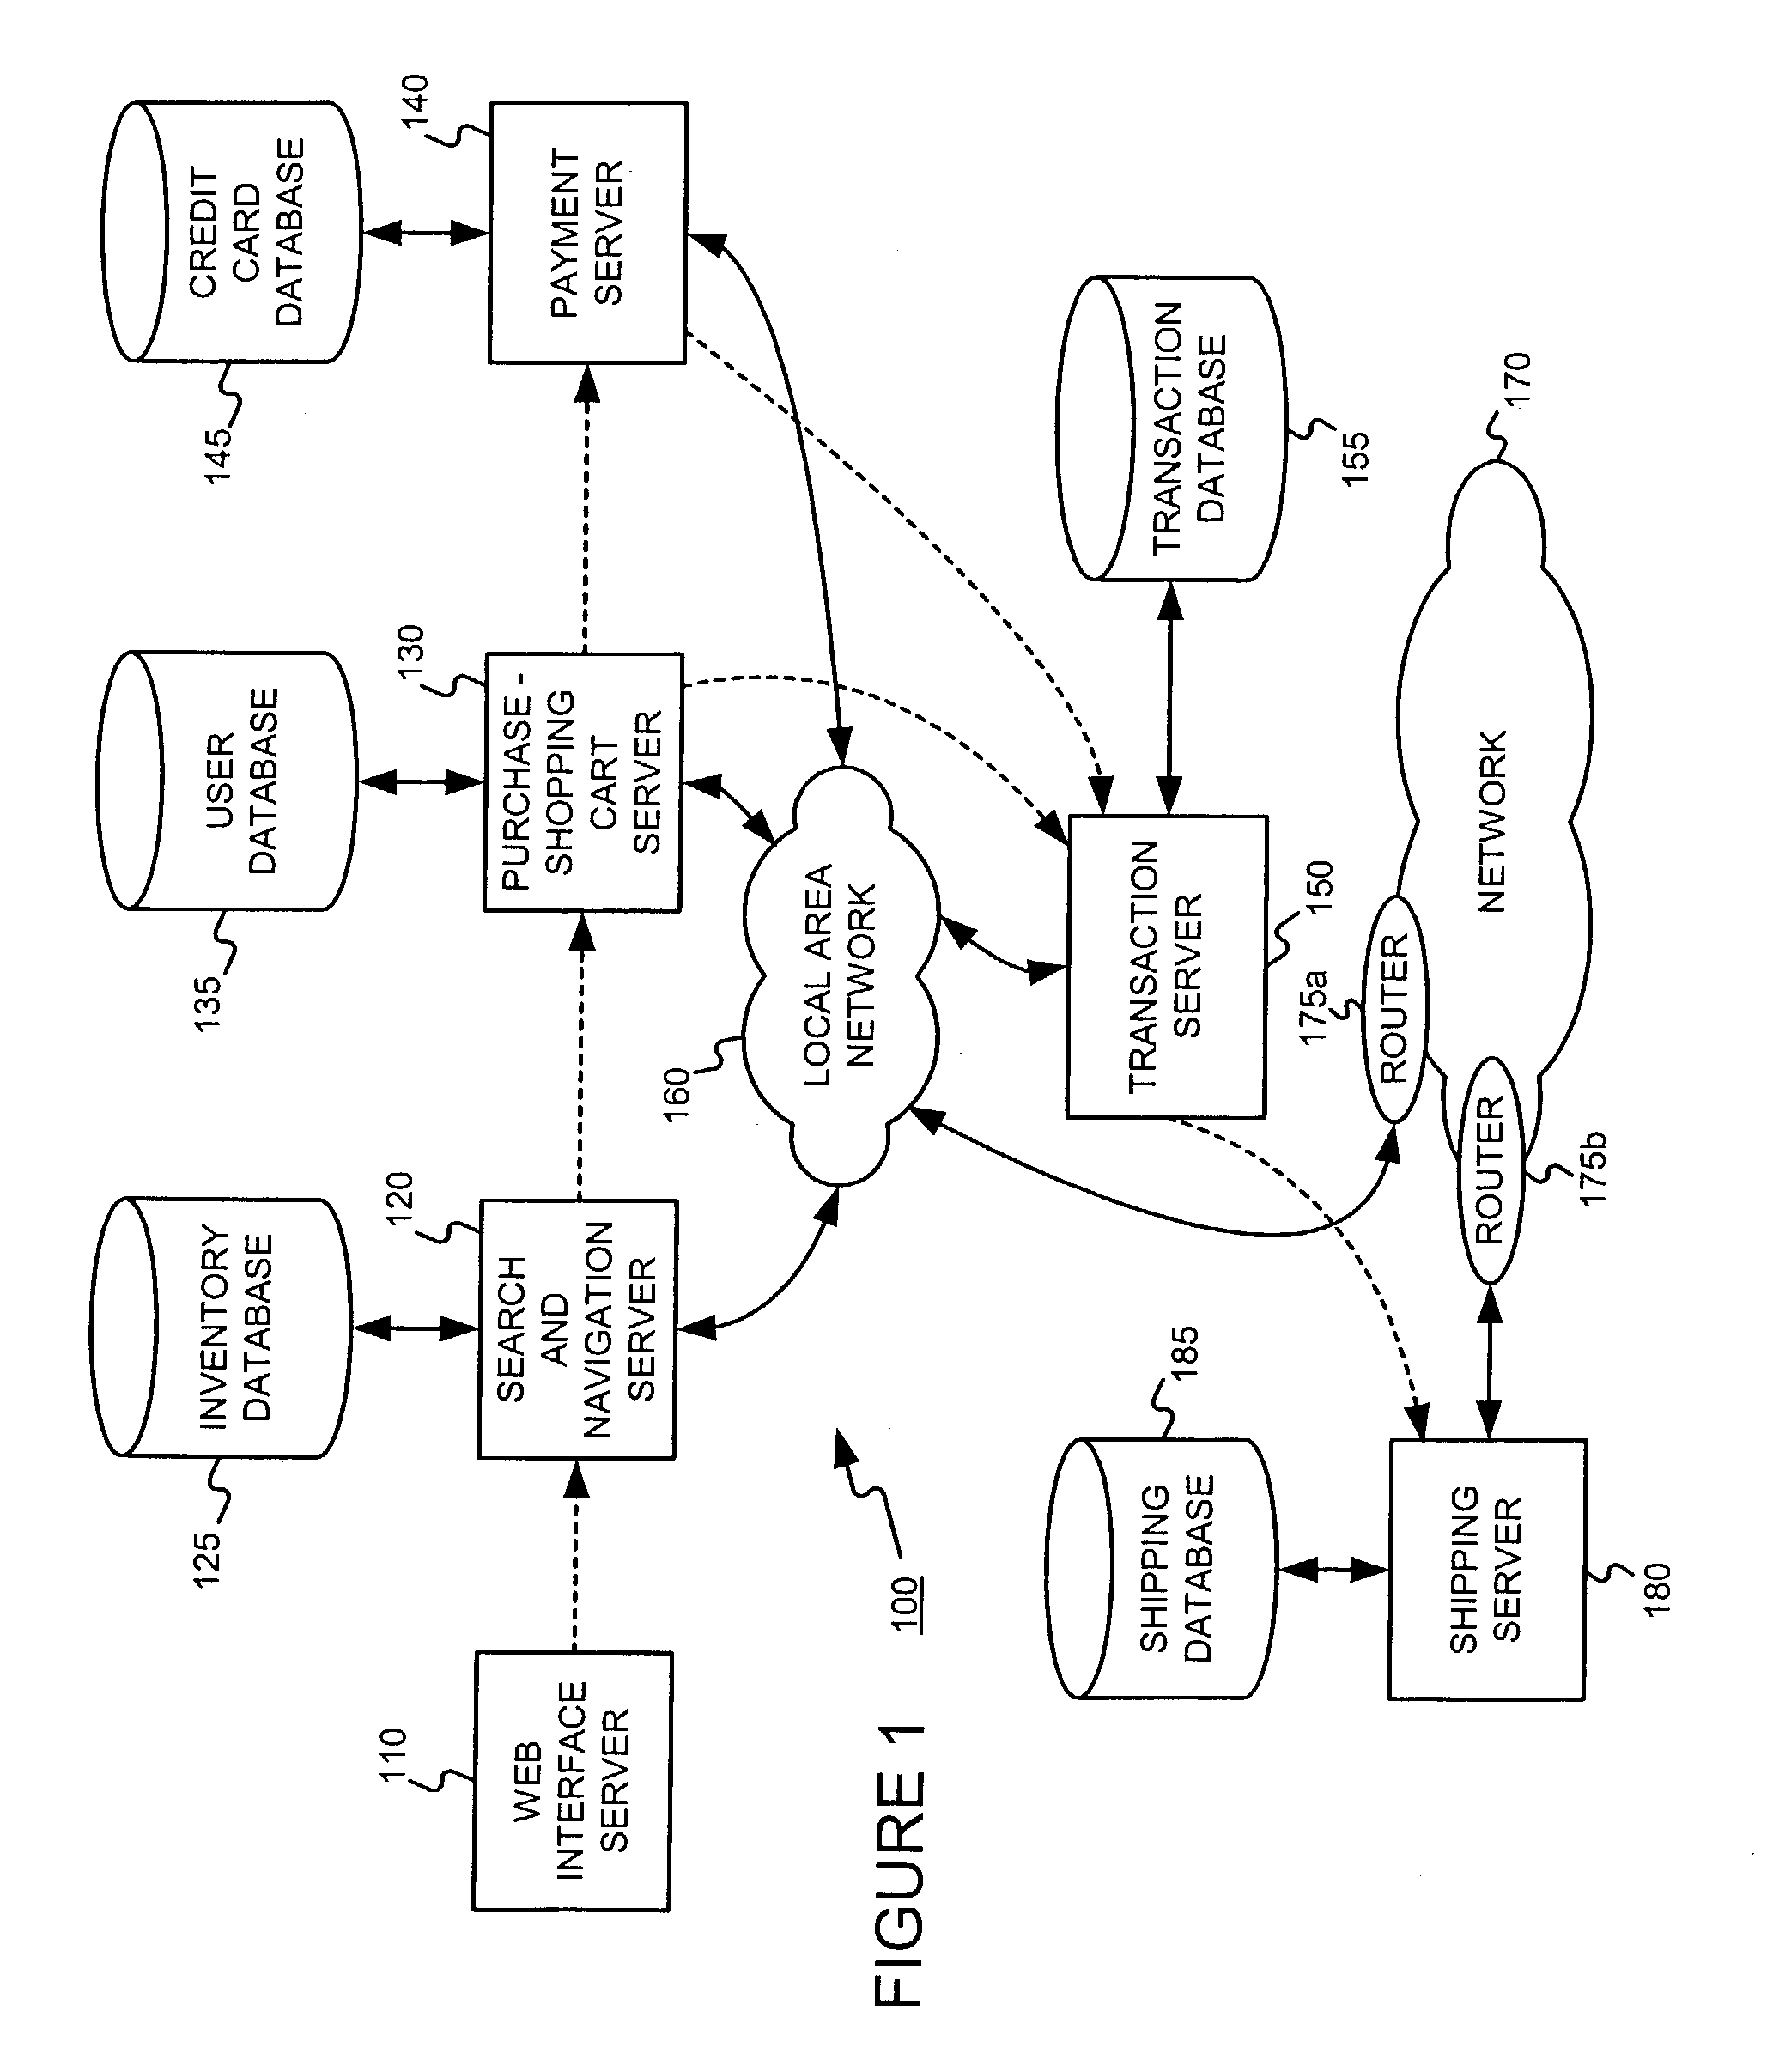 Distributed data gathering and storage for use in a fault and performance monitoring system